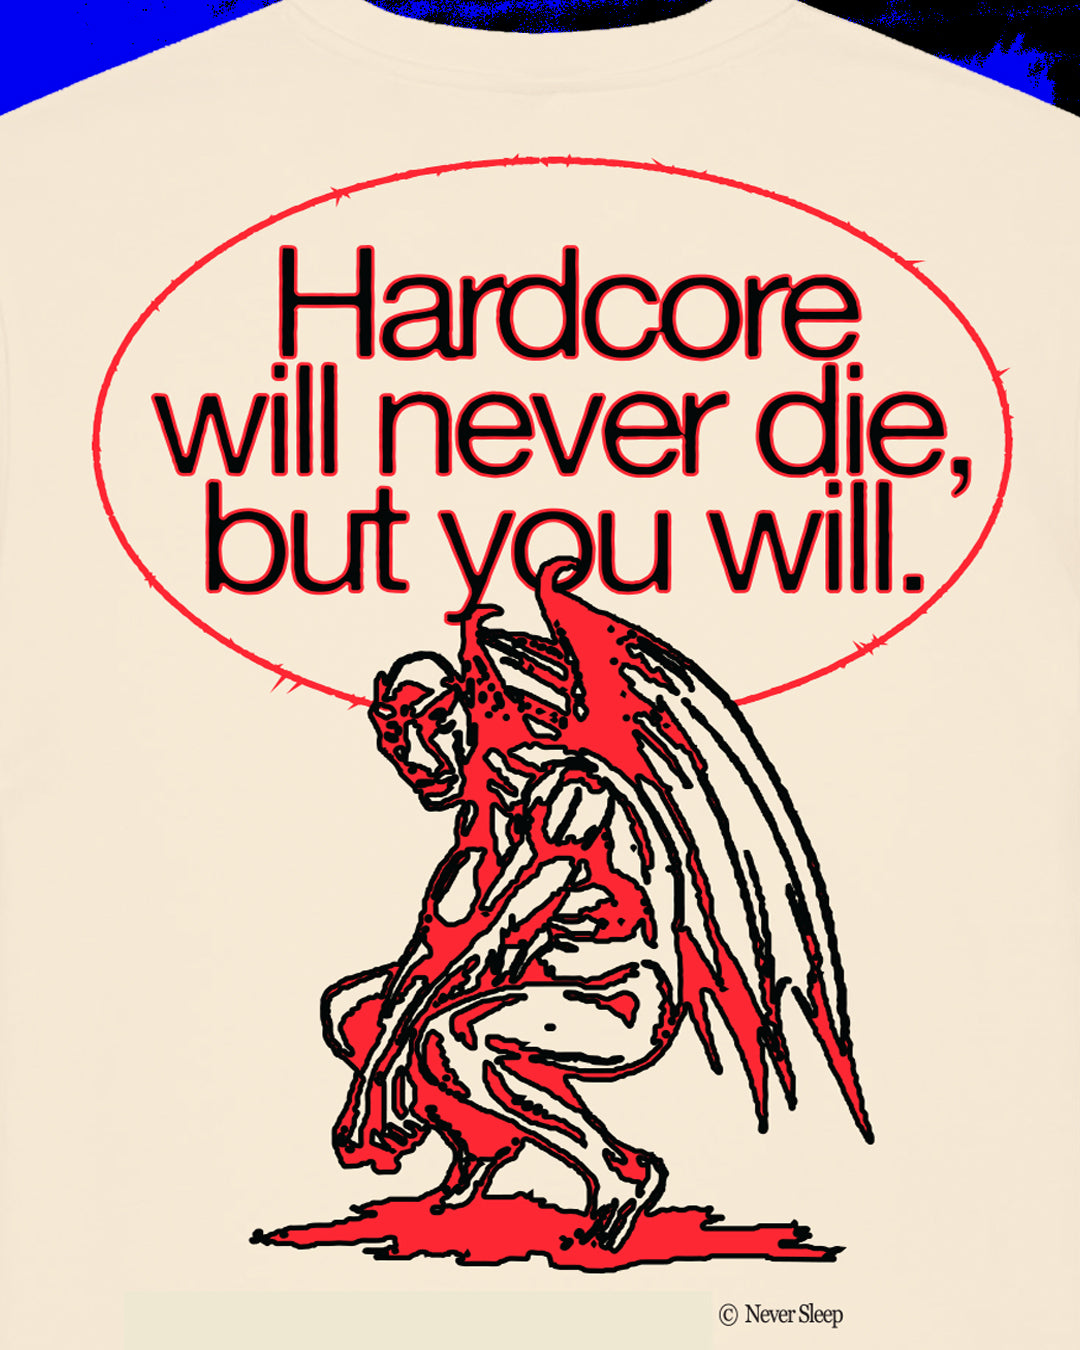 Hardcore will never die, but you will t-shirt